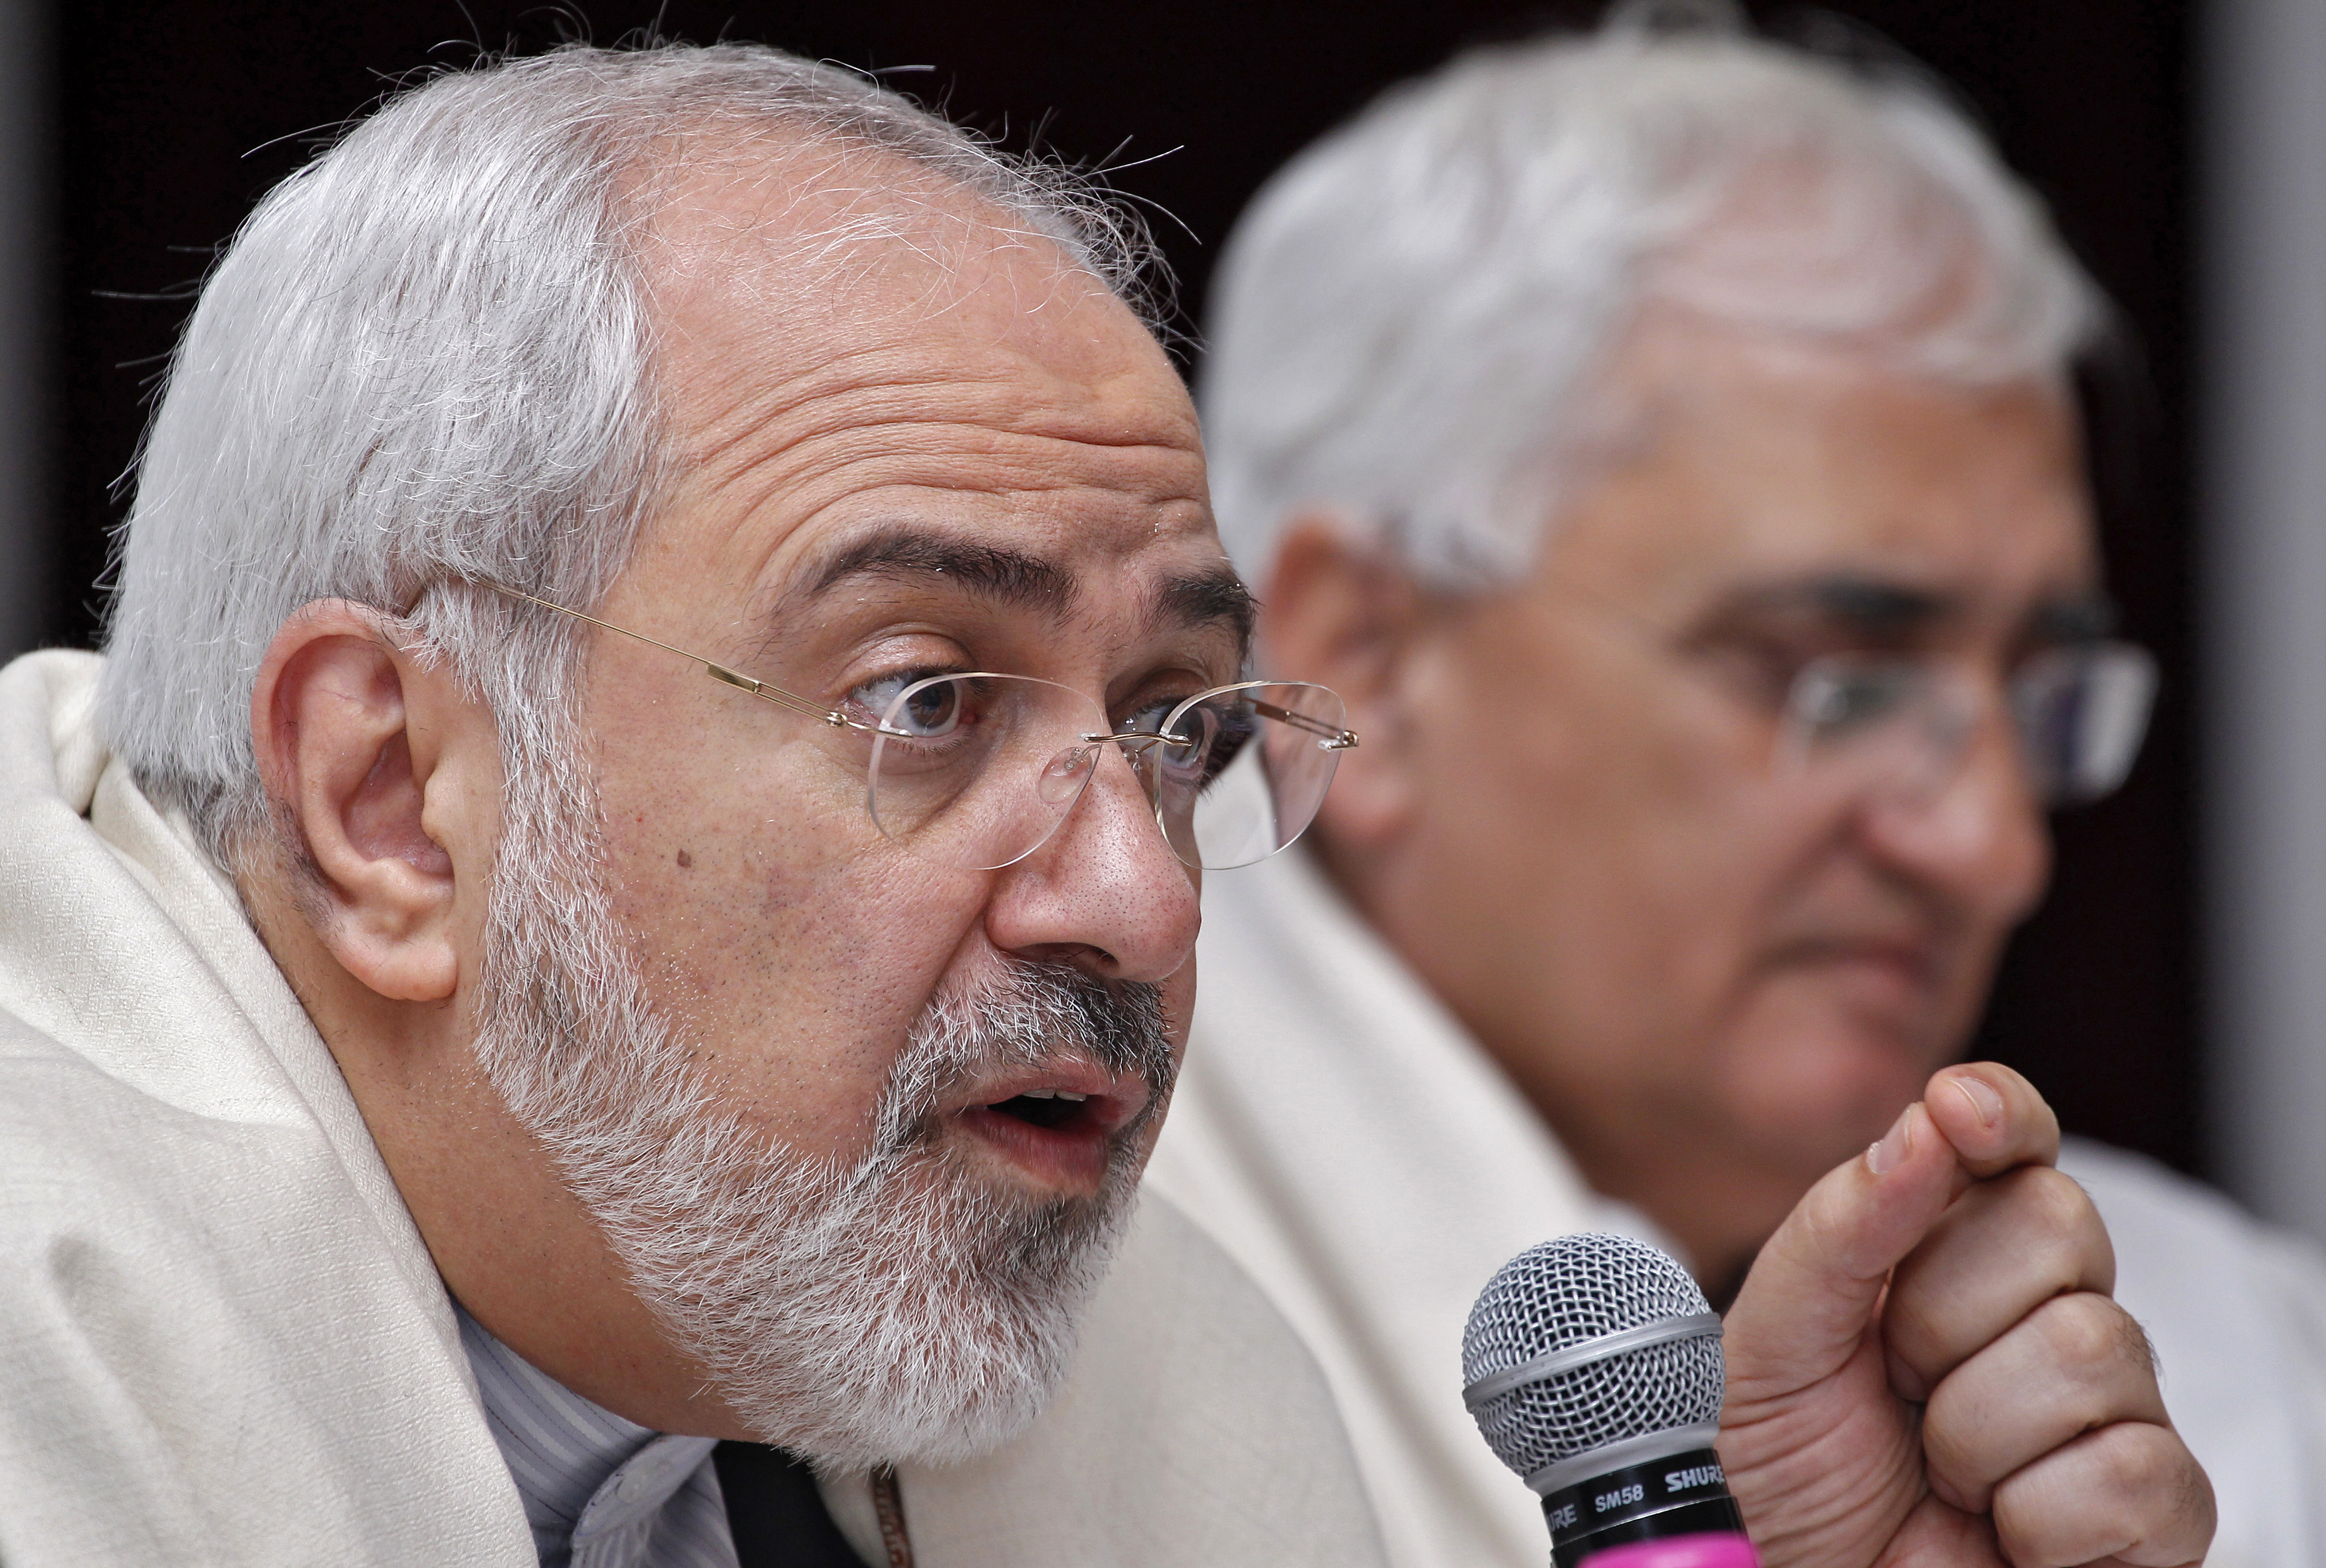 Iran's Foreign Minister Mohammad Javad Zarif speaks as his Indian counterpart Salman Khurshid watches during a lecture themed "Iran's Foreign Policy - Towards Stability in West Asia" organized by the Observer Research Foundation in New Delhi on February 27, 2014. 